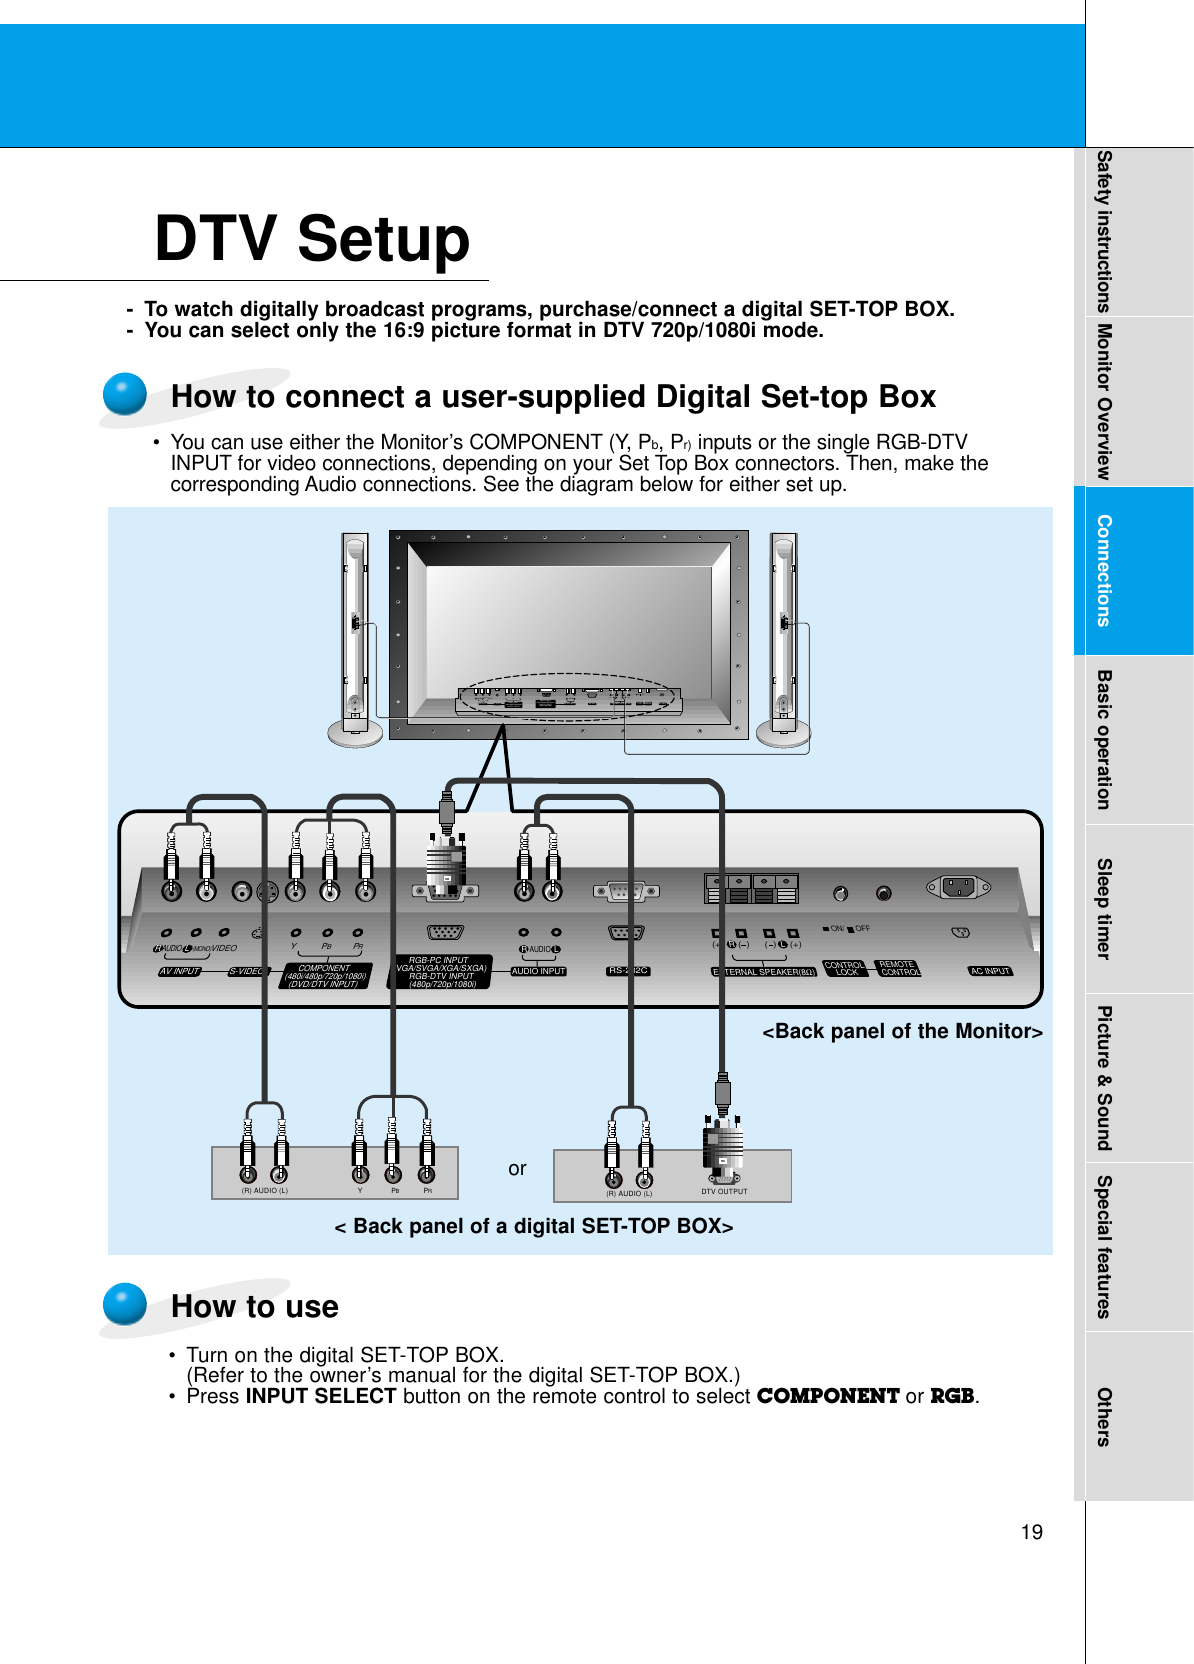 19Safety instructions Monitor Overview Connections Basic operation Sleep timer Picture &amp; Sound Special features OthersDTV Setup- To watch digitally broadcast programs, purchase/connect a digital SET-TOP BOX.- You can select only the 16:9 picture format in DTV 720p/1080i mode.How to connect a user-supplied Digital Set-top BoxHow to use(R) AUDIO (L)(R) AUDIO (L) Y PBRPDTV OUTPUT(+) (  ) (+)(  )AUDIO(MONO)RLVIDEO Y PBRPAV INPUTAUDIORL RLEXTERNAL SPEAKER (8Ω) AC INPUTAUDIO INPUTS-VIDEO COMPONENT(480i/480p/720p/1080i)RGB-PC INPUT(VGA/SVGA/XGA/SXGA)RGB-DTV INPUT(480p/720p/1080i)(DVD/DTV INPUT)(+) (  ) (+)(  )AUDIO(MONO)RLAV INPUT S-VIDEOCOMPONENT(480i/480p/720p/1080i)(DVD/DTV INPUT)RGB-PC INPUTRAUDIO INPUTEXTERNAL SPEAKER(8Ω)RLAC INPUTLAUDIO(VGA/SVGA/XGA/SXGA)RGB-DTV INPUT(480p/720p/1080i)VIDEO YPBPRRS-232CRS-232CCONTROLLOCK REMOTECONTROLREMOTECONTROLCONTROLLOCKON/ OFFON/ OFF•Turn on the digital SET-TOP BOX.(Refer to the owner’s manual for the digital SET-TOP BOX.)•Press INPUT SELECT button on the remote control to select COMPONENT or RGB.&lt; Back panel of a digital SET-TOP BOX&gt;or•You can use either the Monitor’s COMPONENT (Y, Pb, Pr) inputs or the single RGB-DTVINPUT for video connections, depending on your Set Top Box connectors. Then, make thecorresponding Audio connections. See the diagram below for either set up.&lt;Back panel of the Monitor&gt;